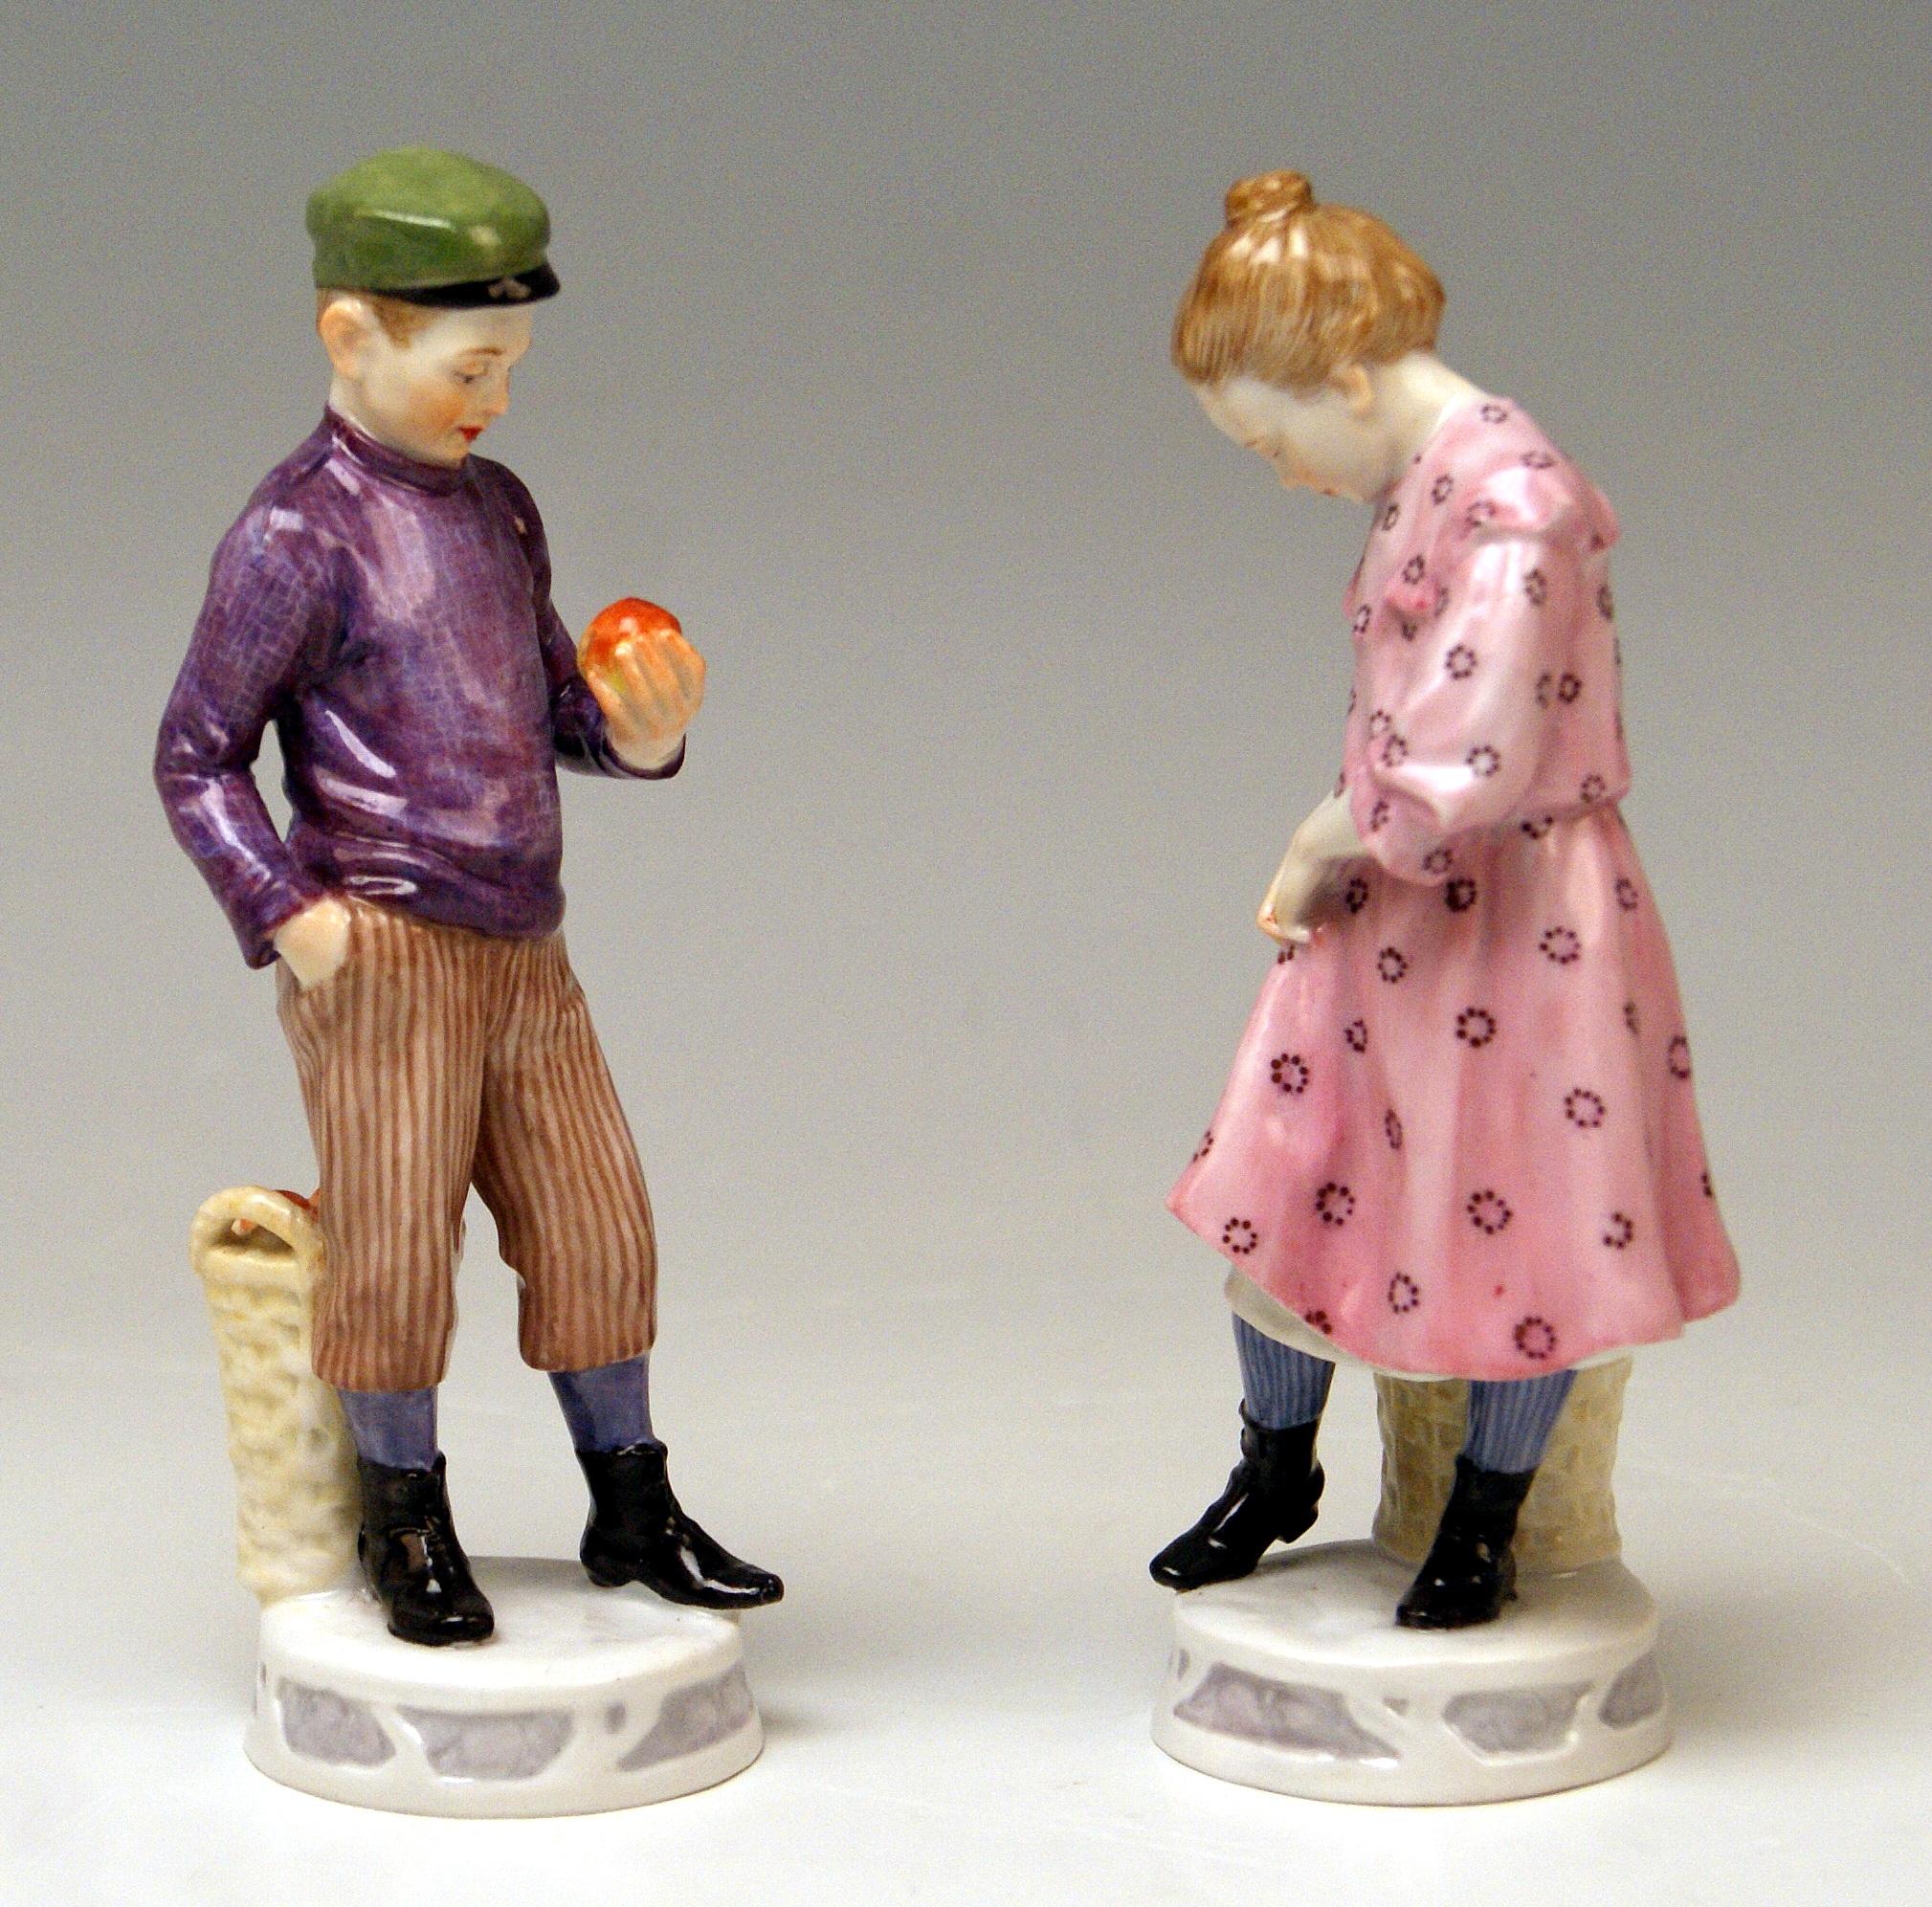 MEISSEN GORGEOUS PAIR OF ART NOUVEAU FIGURINES:  Boy and Girl with Apples

Manufactory: Meissen 
Dating:      made circa 1910
Hallmarked:  Meissen Mark with Pommels on Hilts (shortly after Turn of the Century)
FIRST